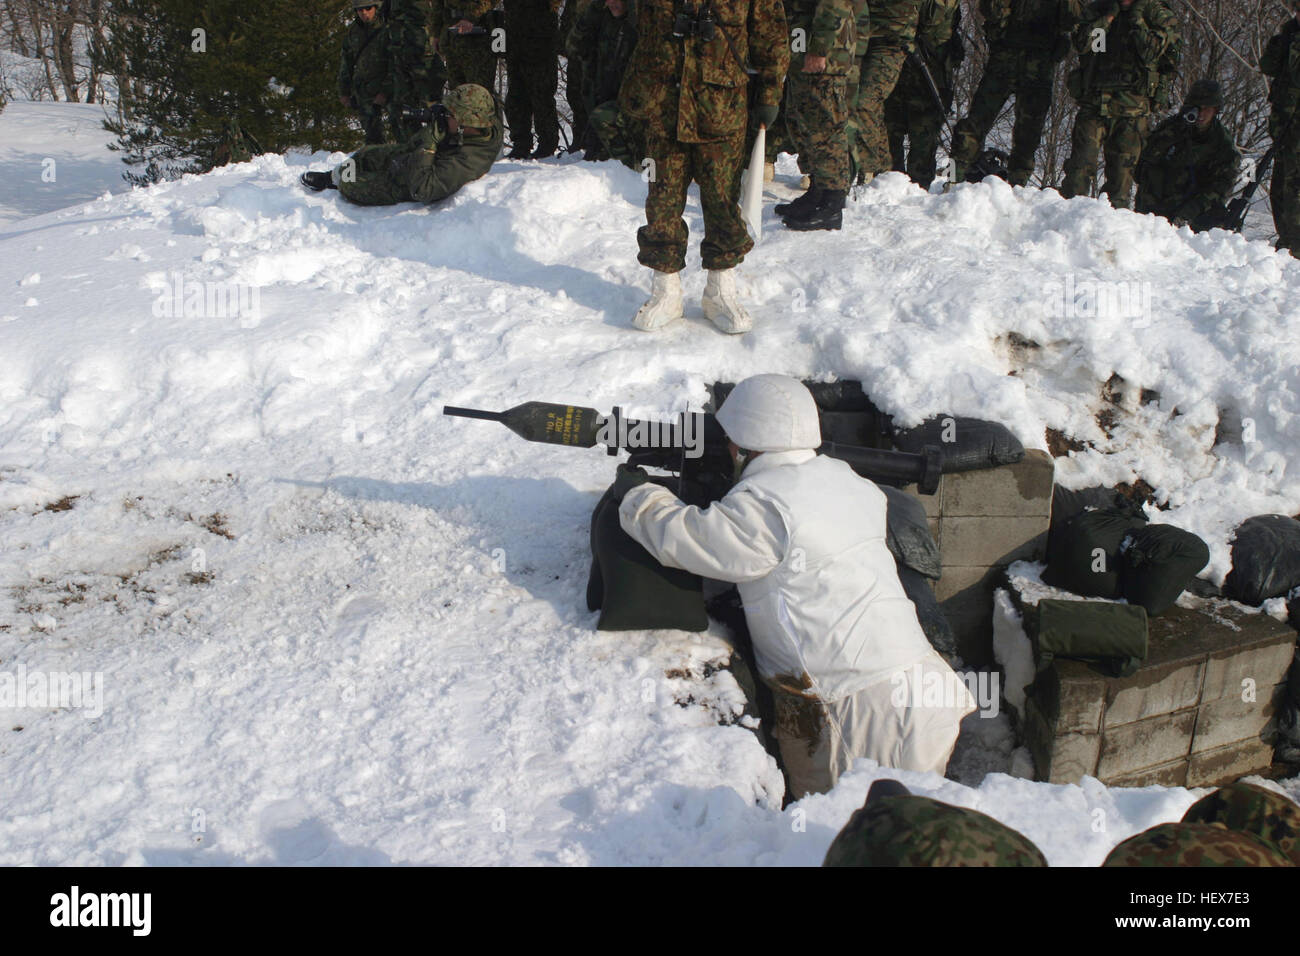 A Japanese Ground Self Defense Force (JGSDF) Soldier from the 20th Infantry Regiment (dressed in white cold-weather gear), prepares to engage targets down range with a Panzerfaust 3-T 600 Light Anti-tank Weapon, during a live fire exercise conducted at the snow covereded Ojojibara Maneuver Area of Sendai, Japan, while participating in Exercise FOREST LIGHT 2004. Forest Light is a bi-lateral training exercise conducted between the US Marine Corps (USMC) and the JGSDF. Japanese 20th Infantry Regiment soldier with Panzerfaust 3 2-12-04 Stock Photo